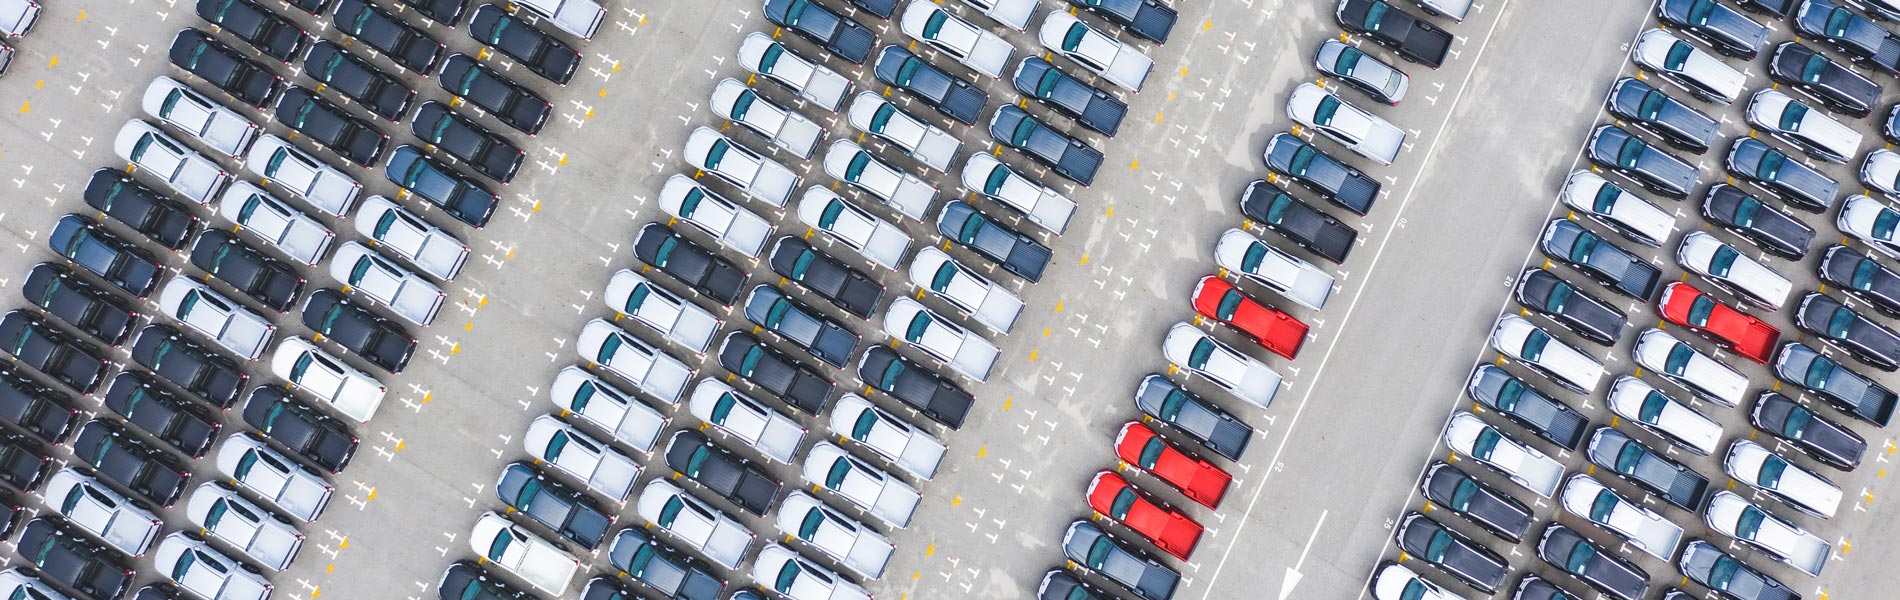 Cars parked in rows viewed from above